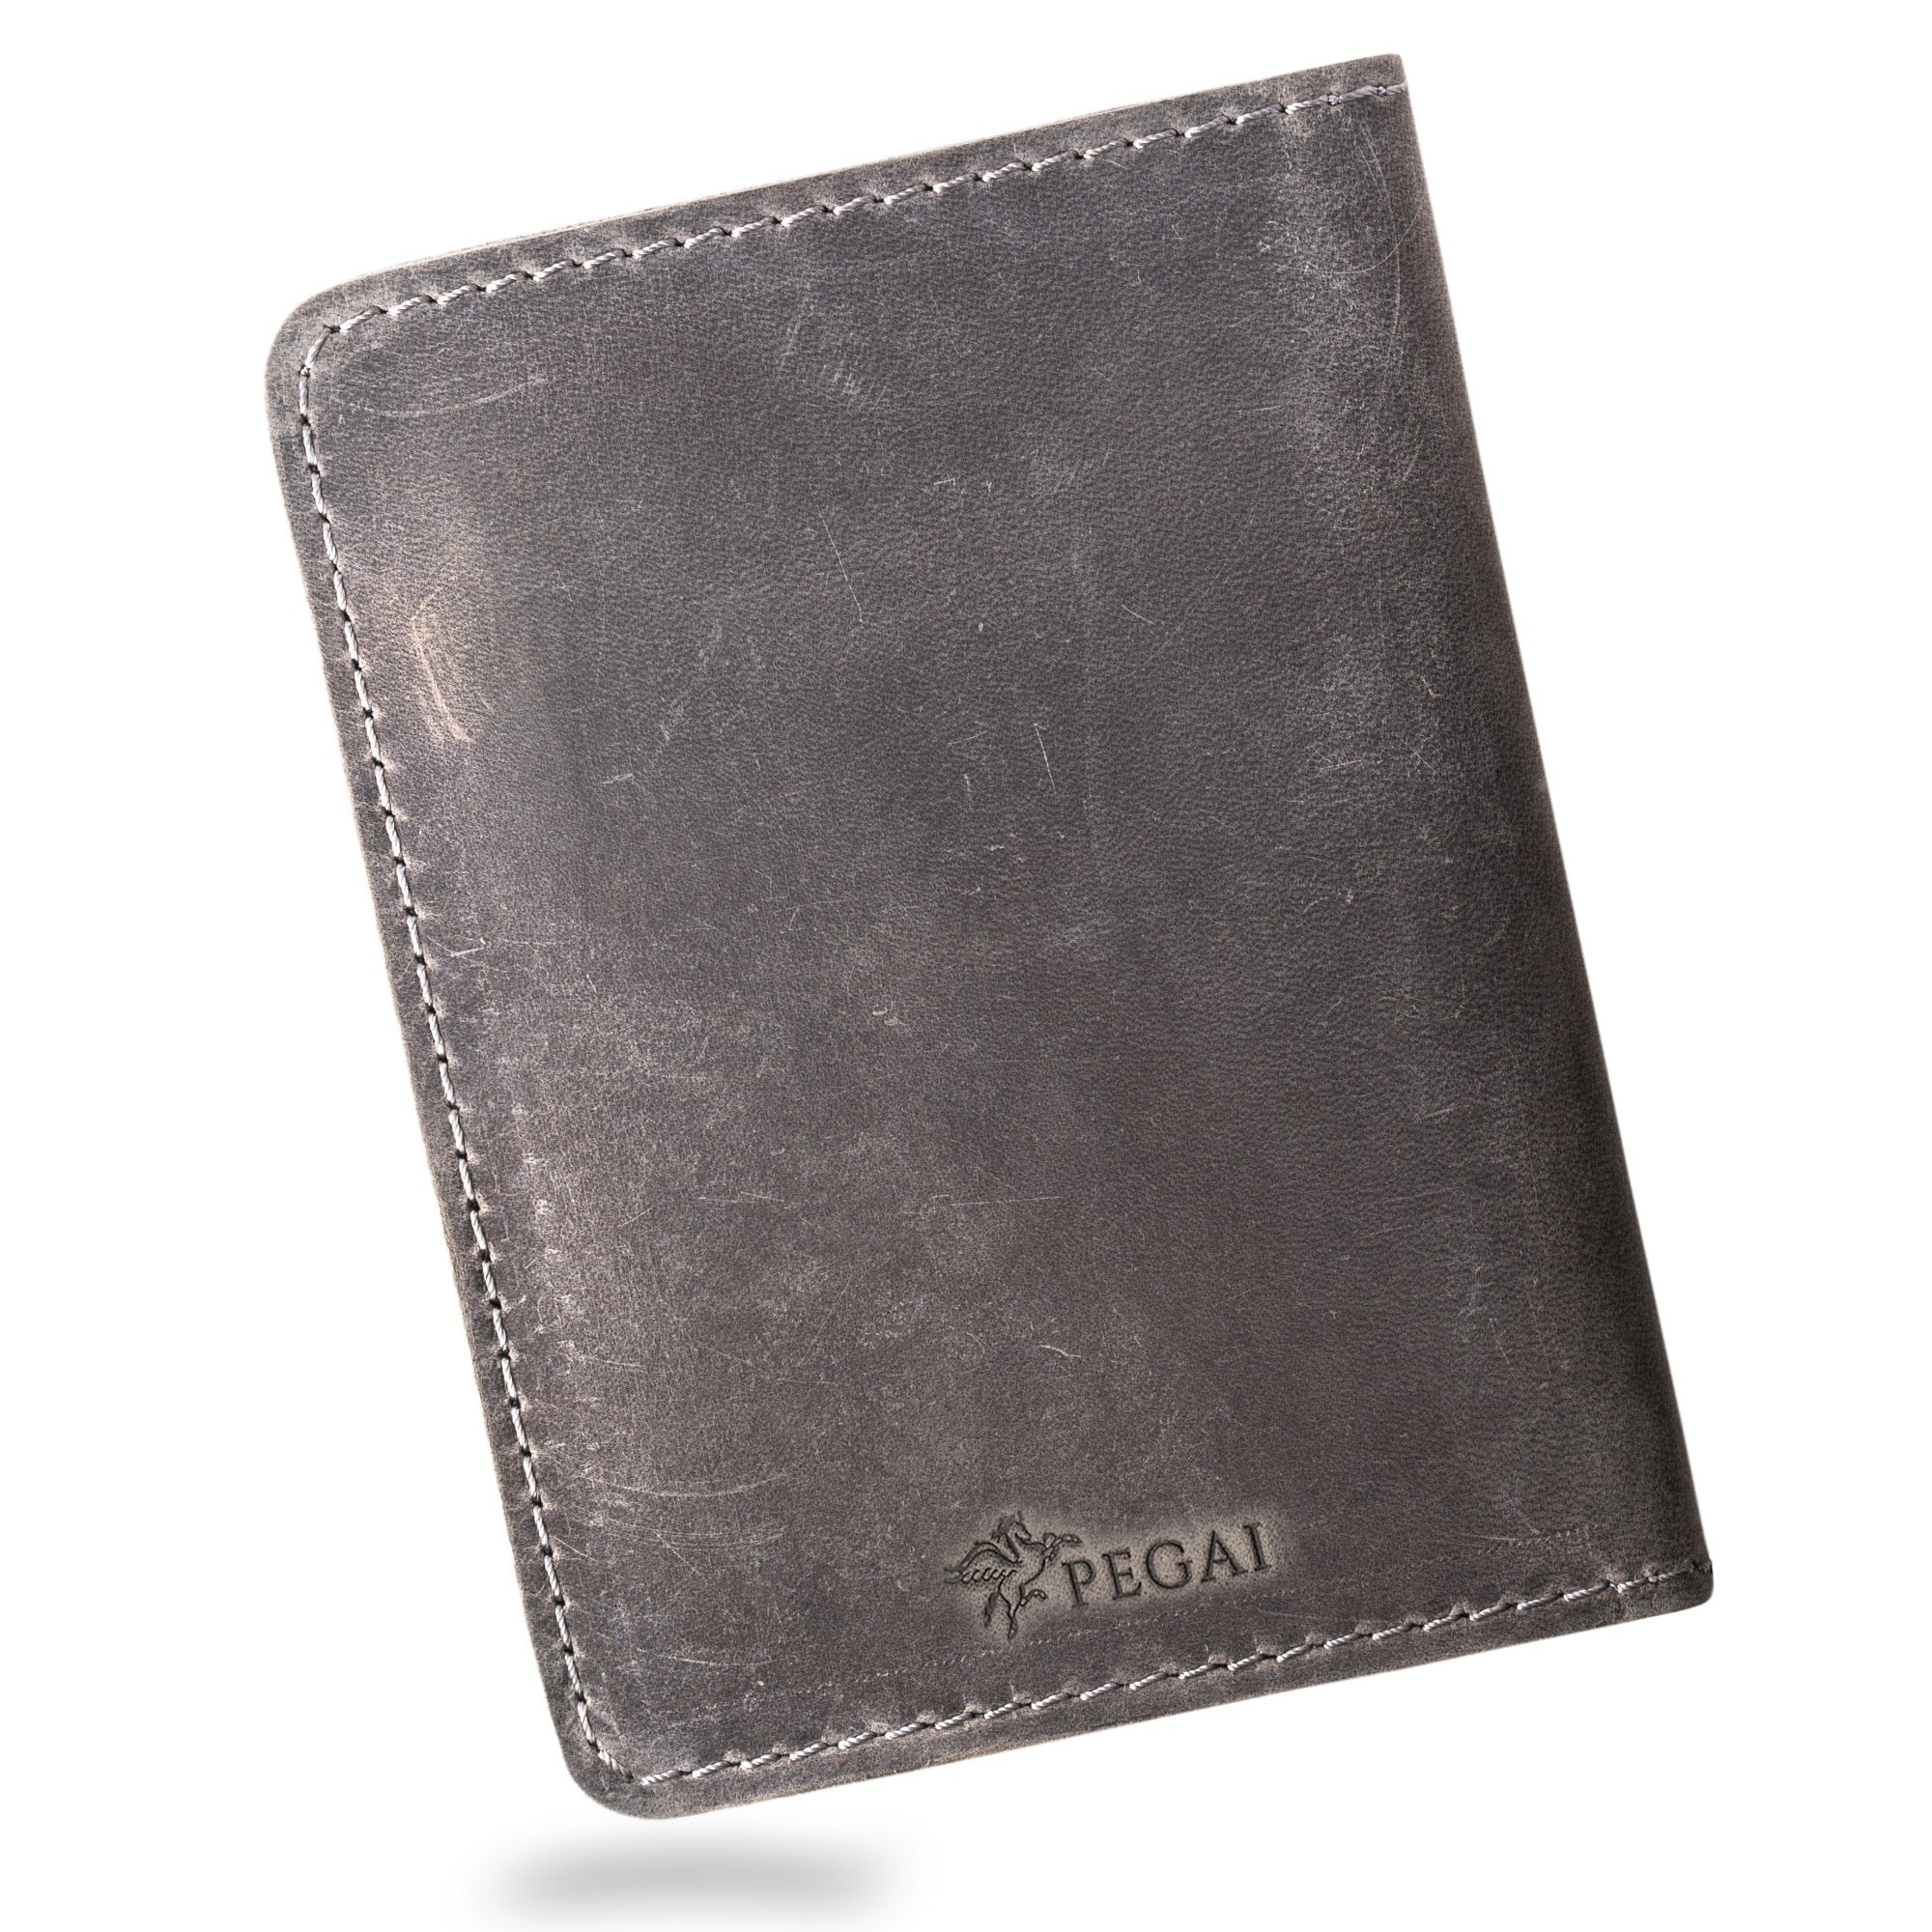 PERSONALIZED Leather Travel Wallet Distressed Leather Passport - Etsy